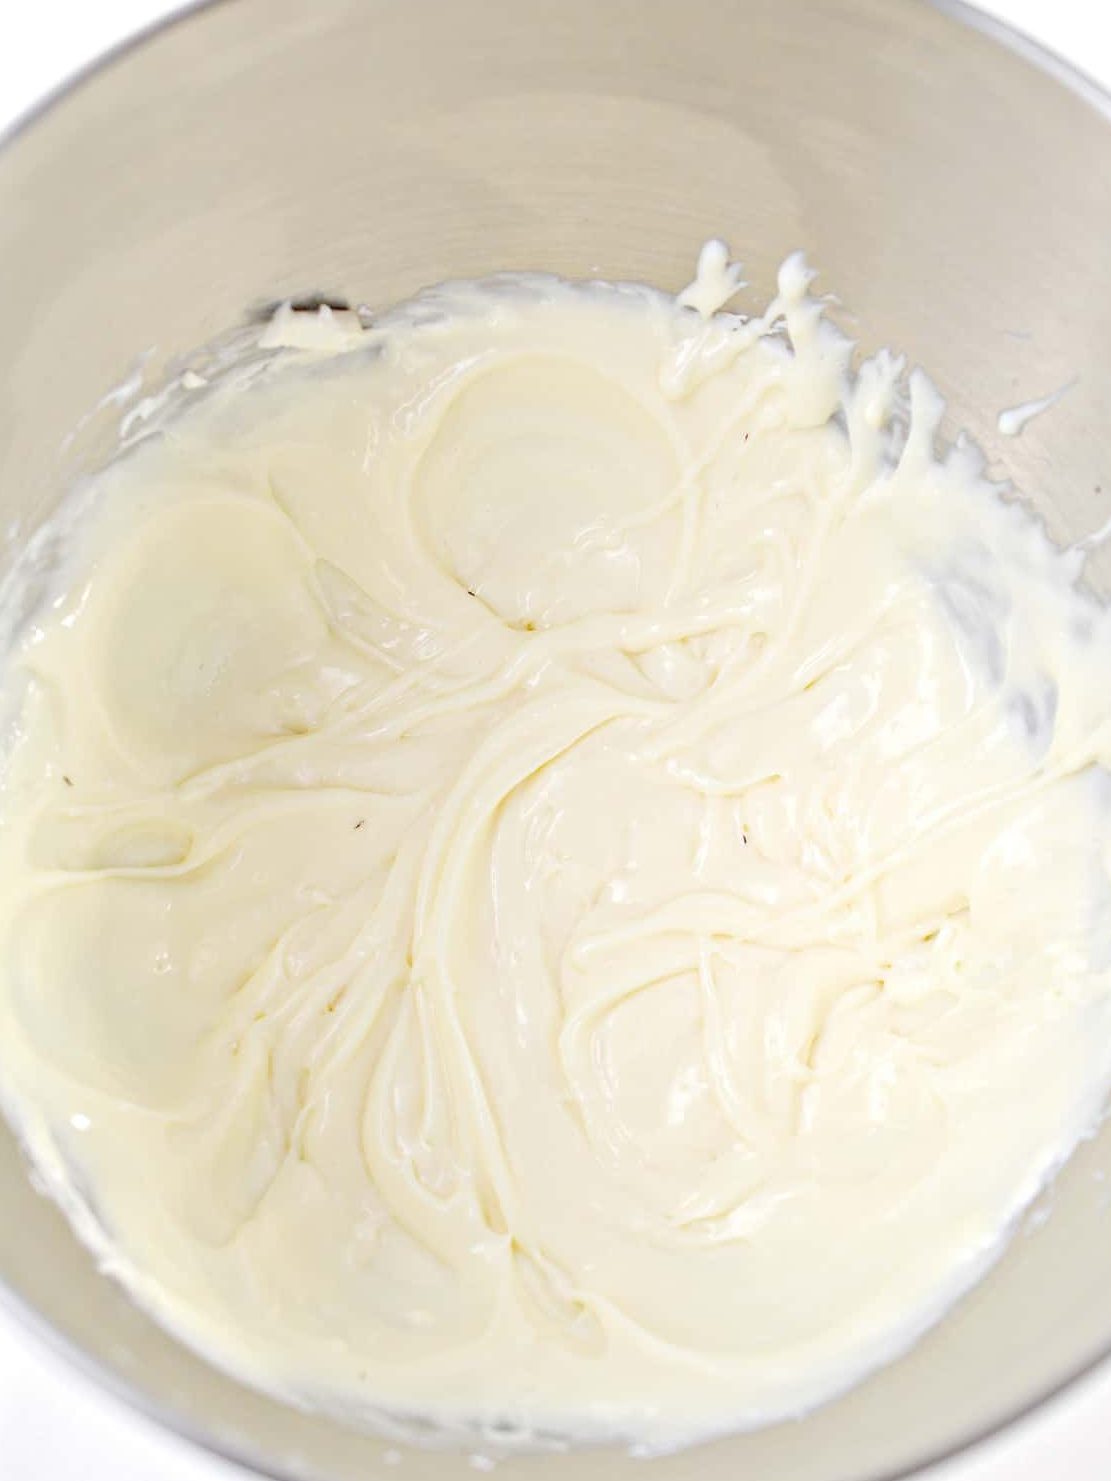 In a bowl, whisk together the milk and instant pudding mix until thick and creamy.